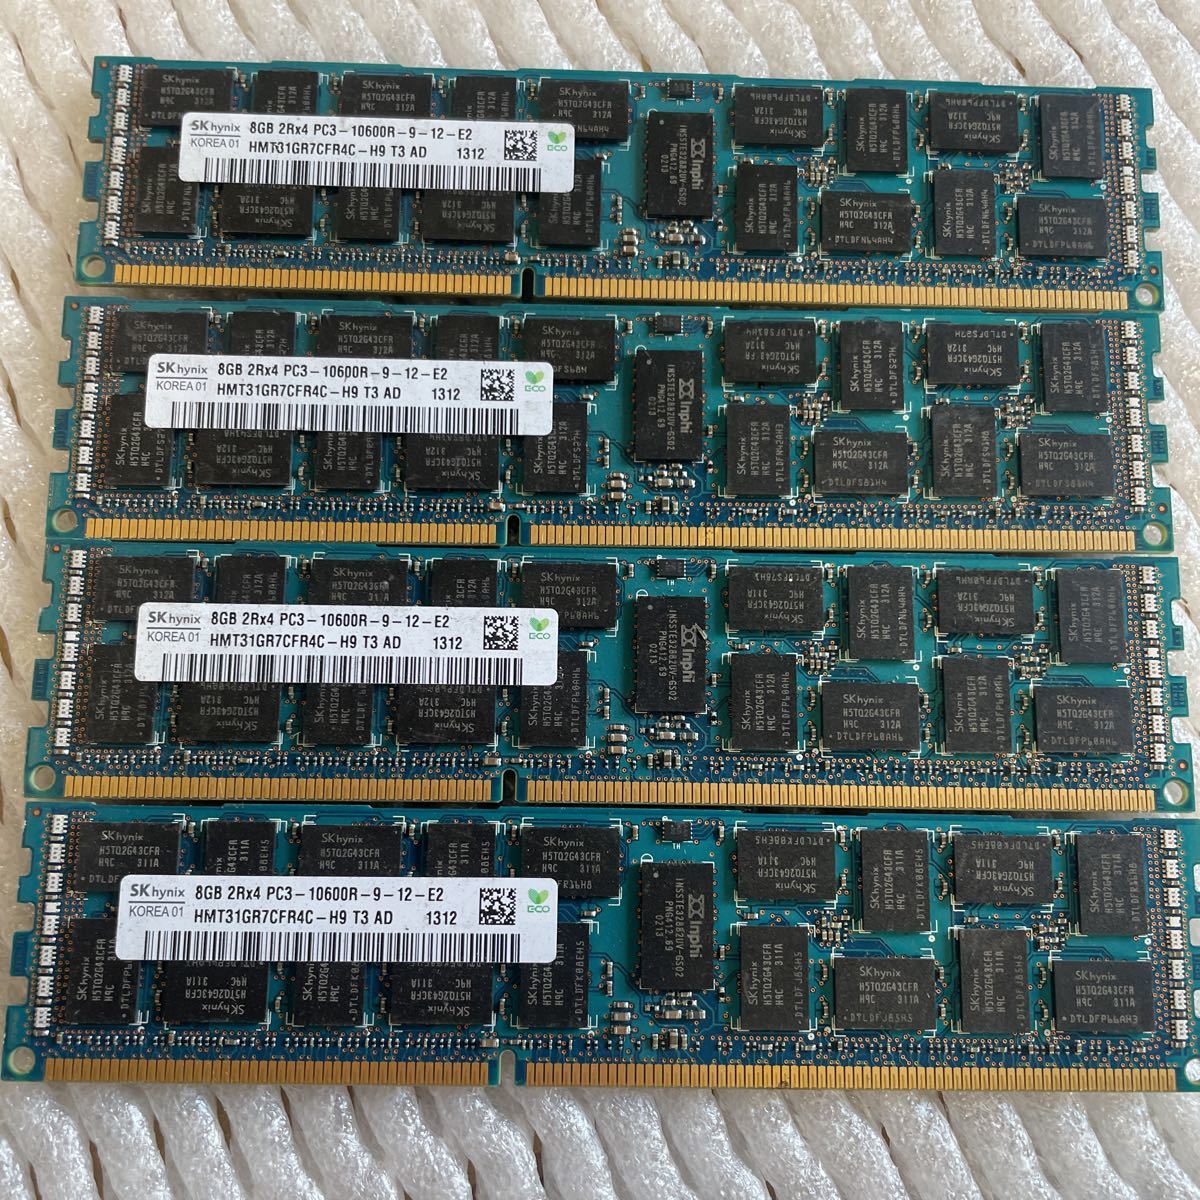 (9009) used 8GB 2Rx4 PC3-10600R-09-12 DDR3 4 pieces set memory total 32GB server for 